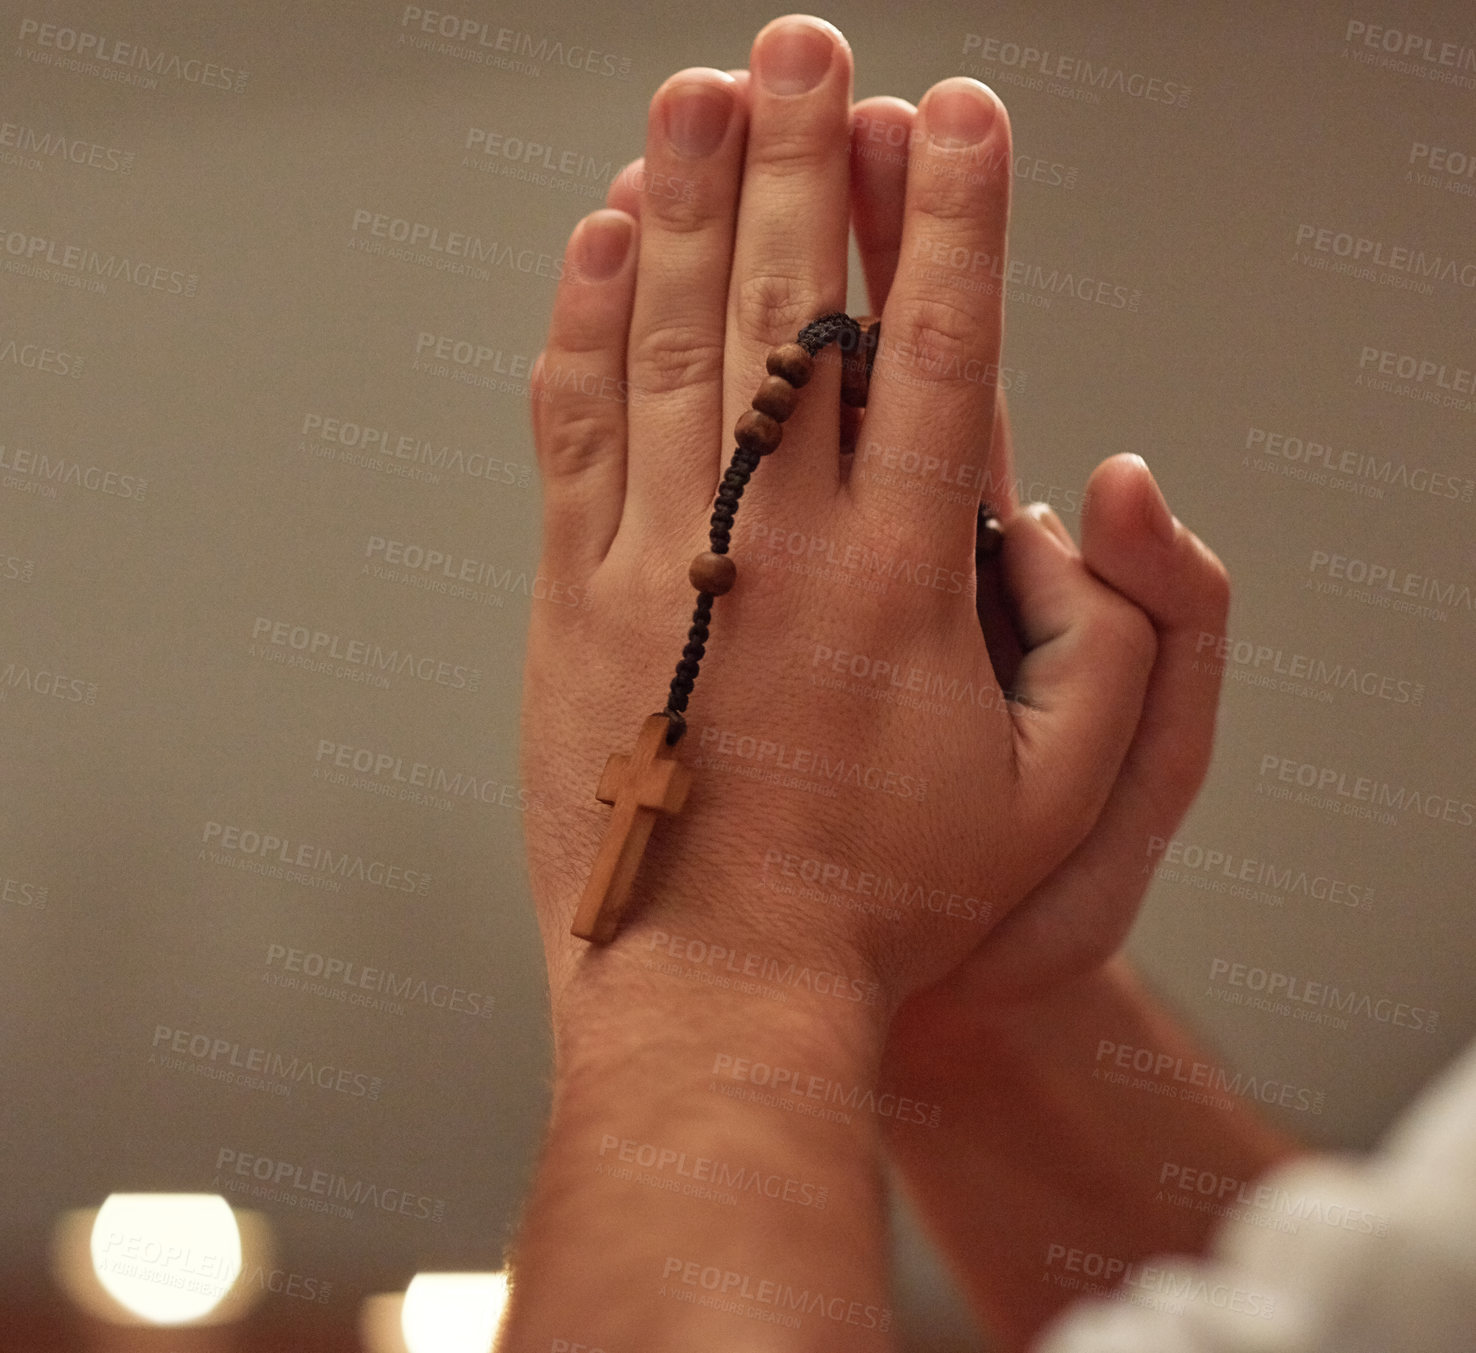 Buy stock photo Cropped shot of a man holding a rosary and praying